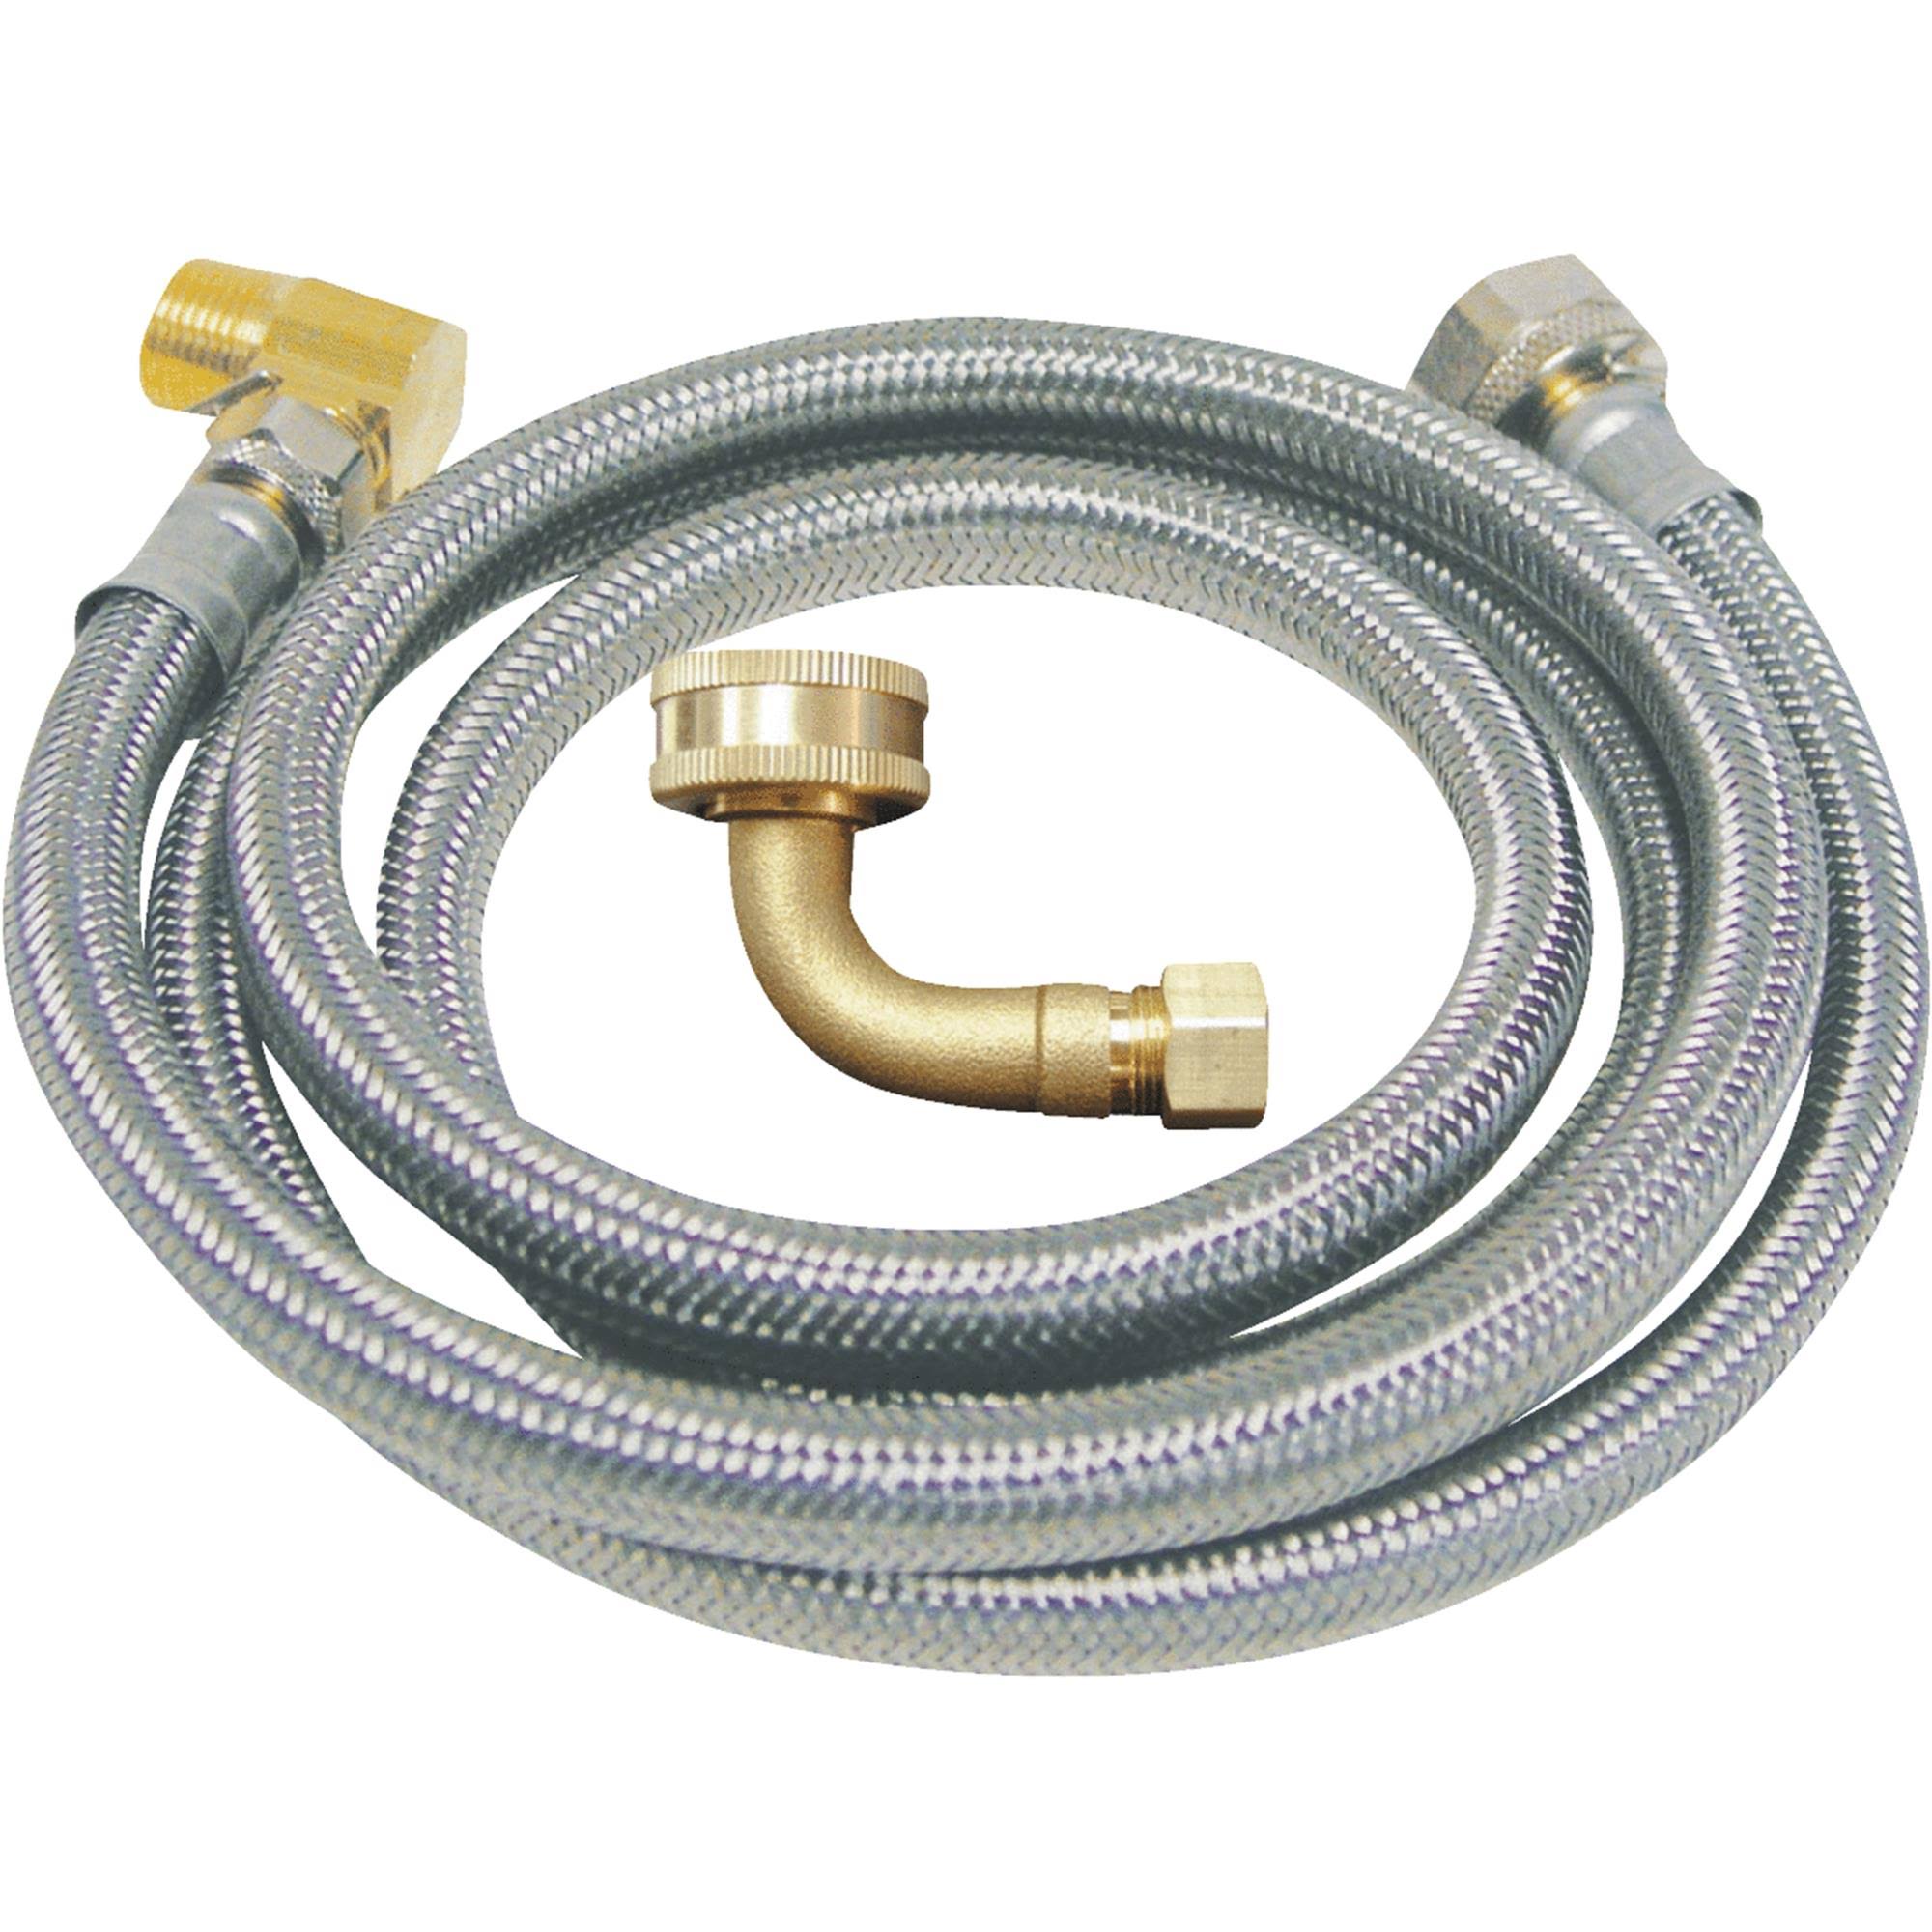 B&K Stainless Steel Dishwasher Connector 496-202